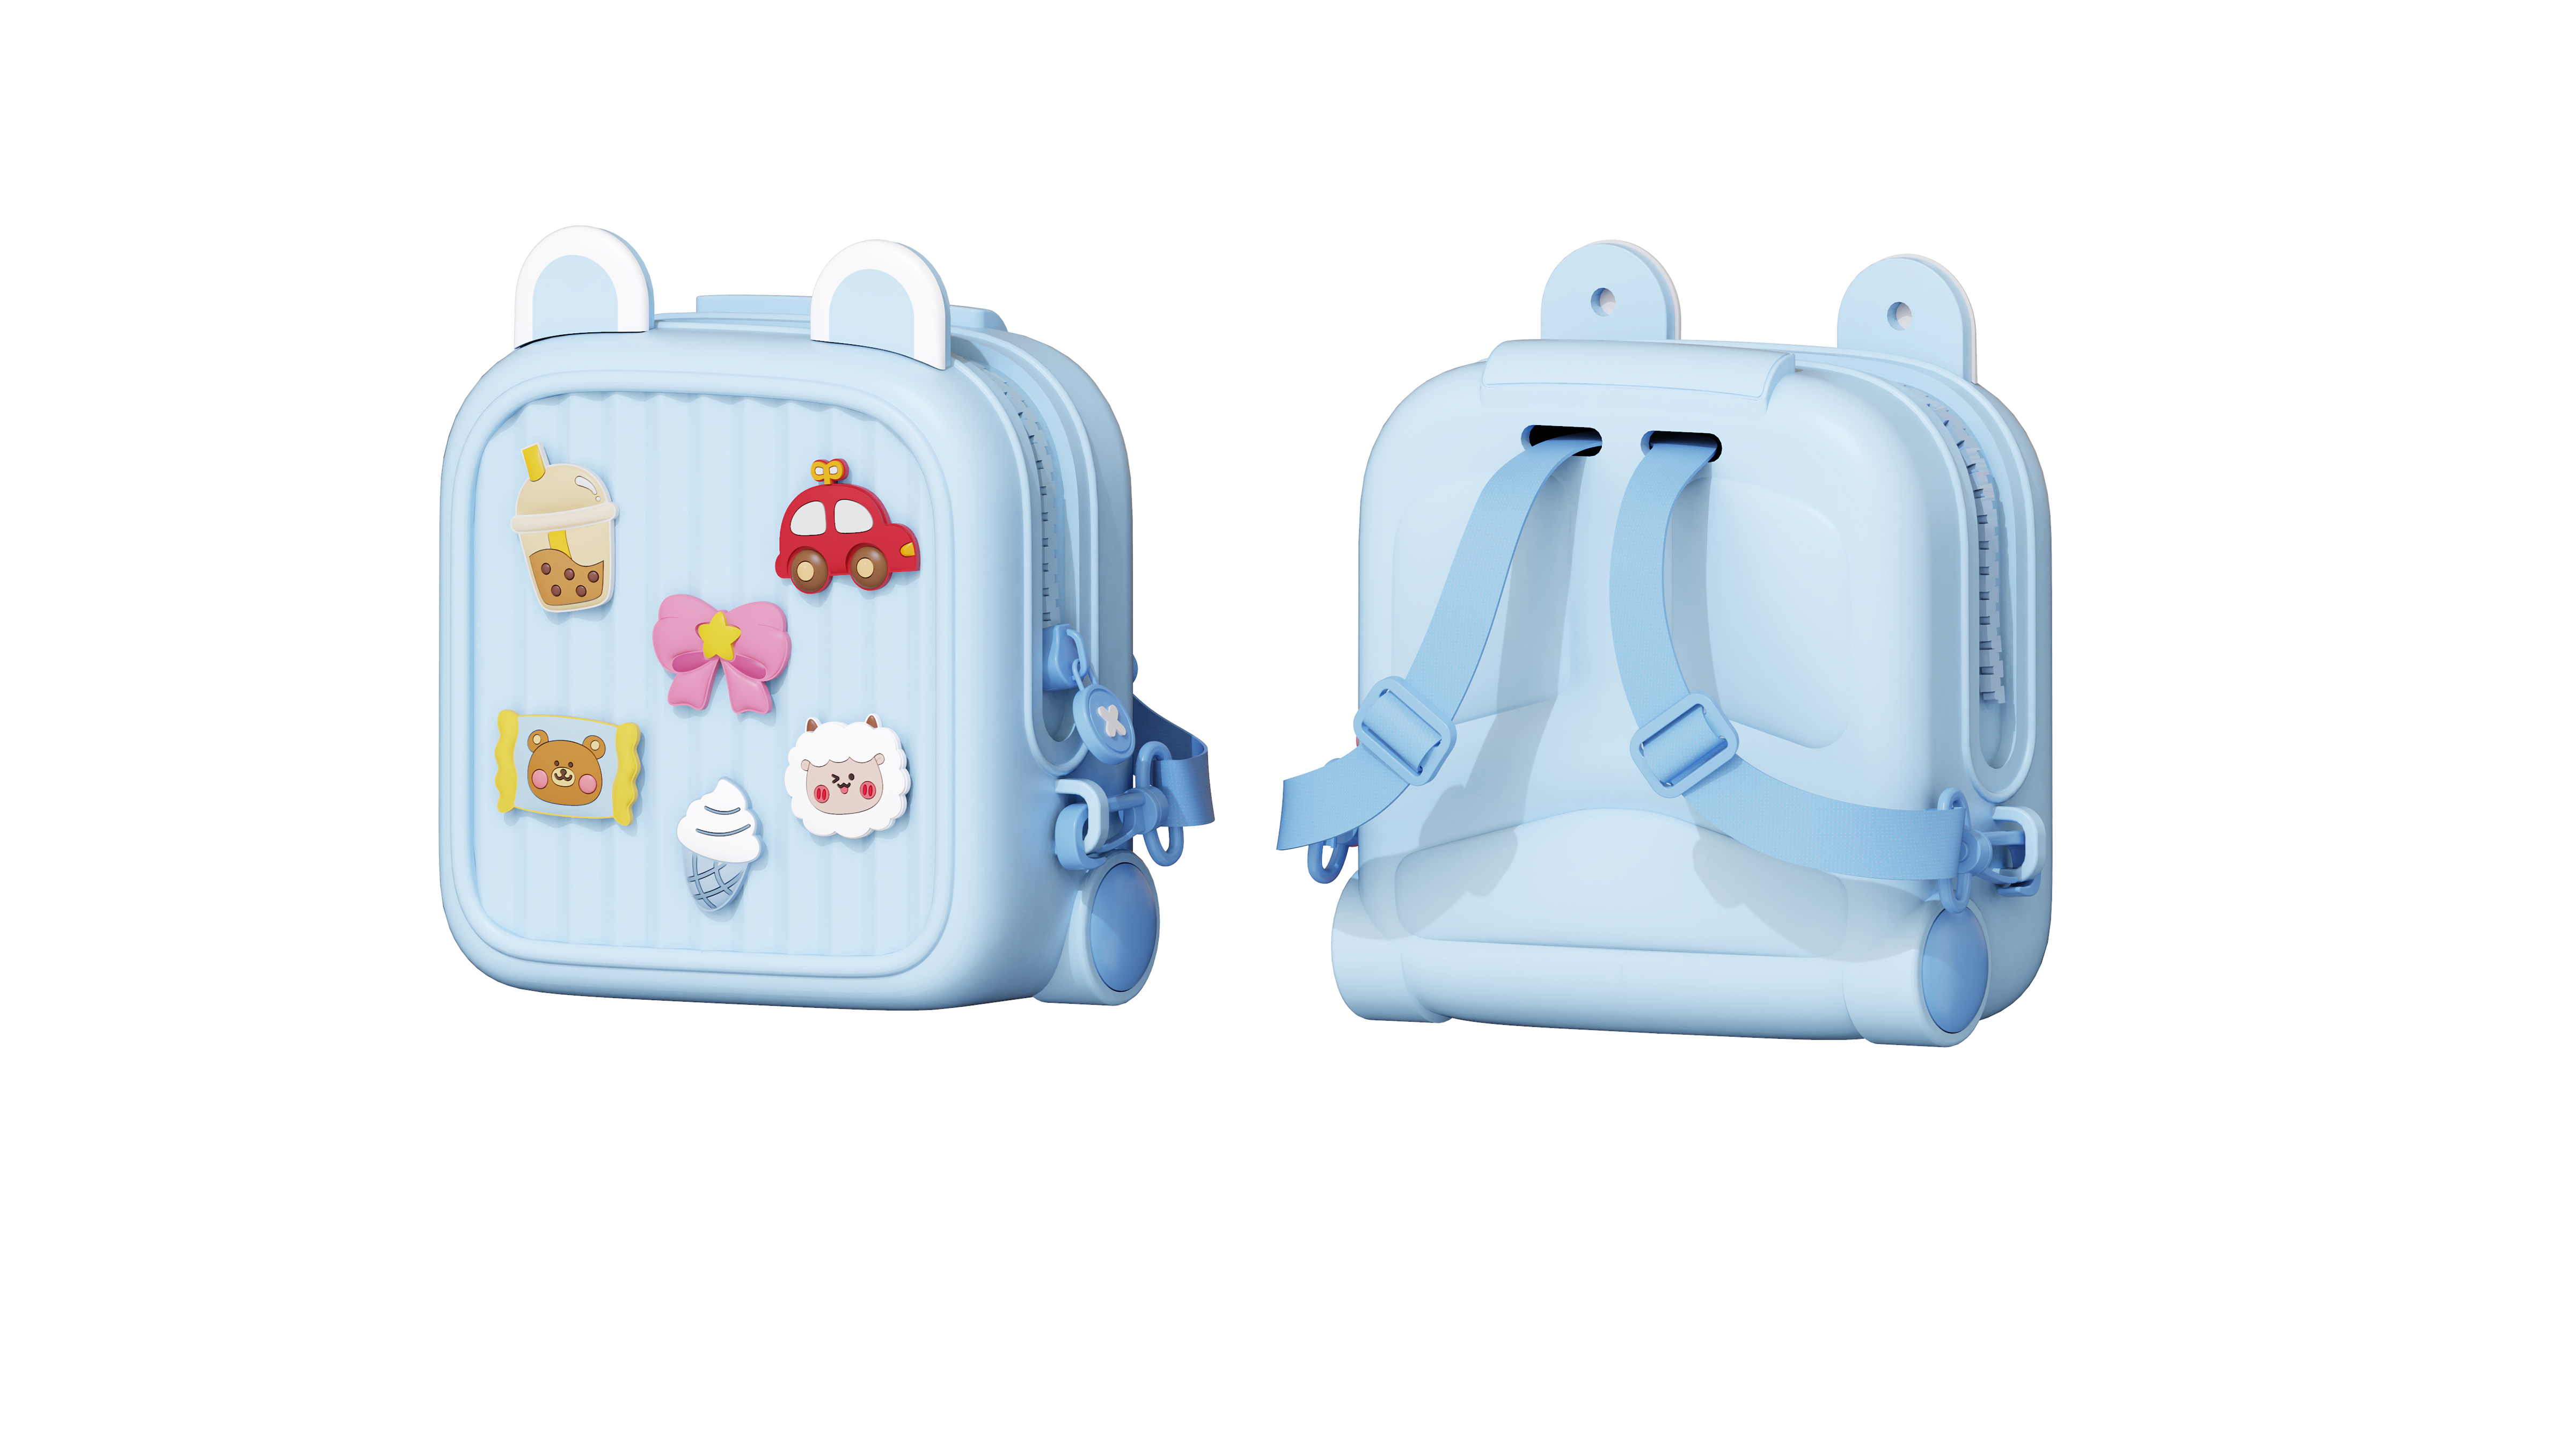 Why EVA Bags Are the Best Gift to Kids? - Dongguan Changying Sponge ...